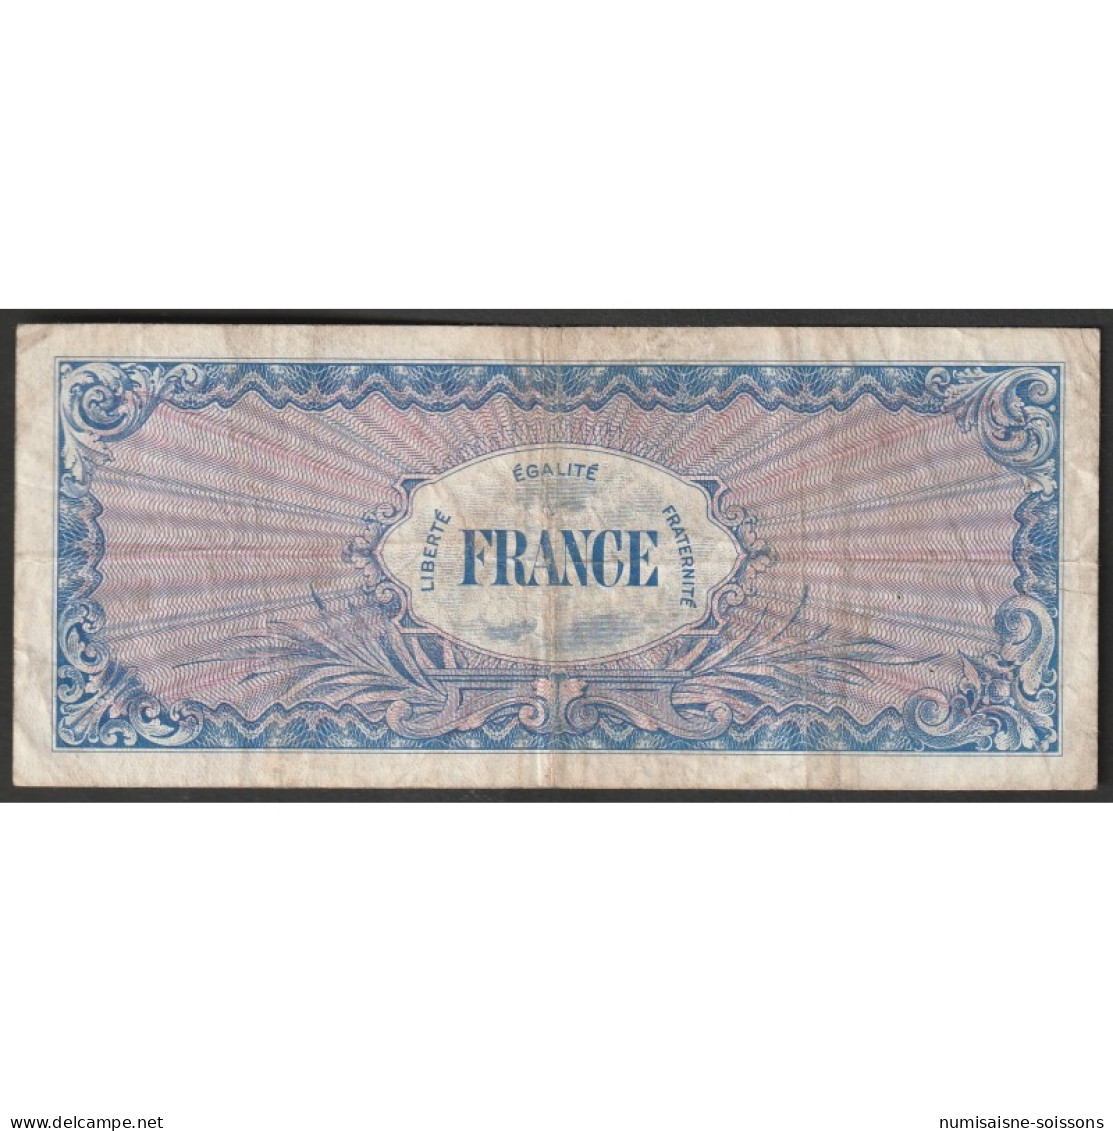 FAY VF 24/1 - 50 FRANCS VERSO FRANCE - 1945 - PICK 117a - Unclassified